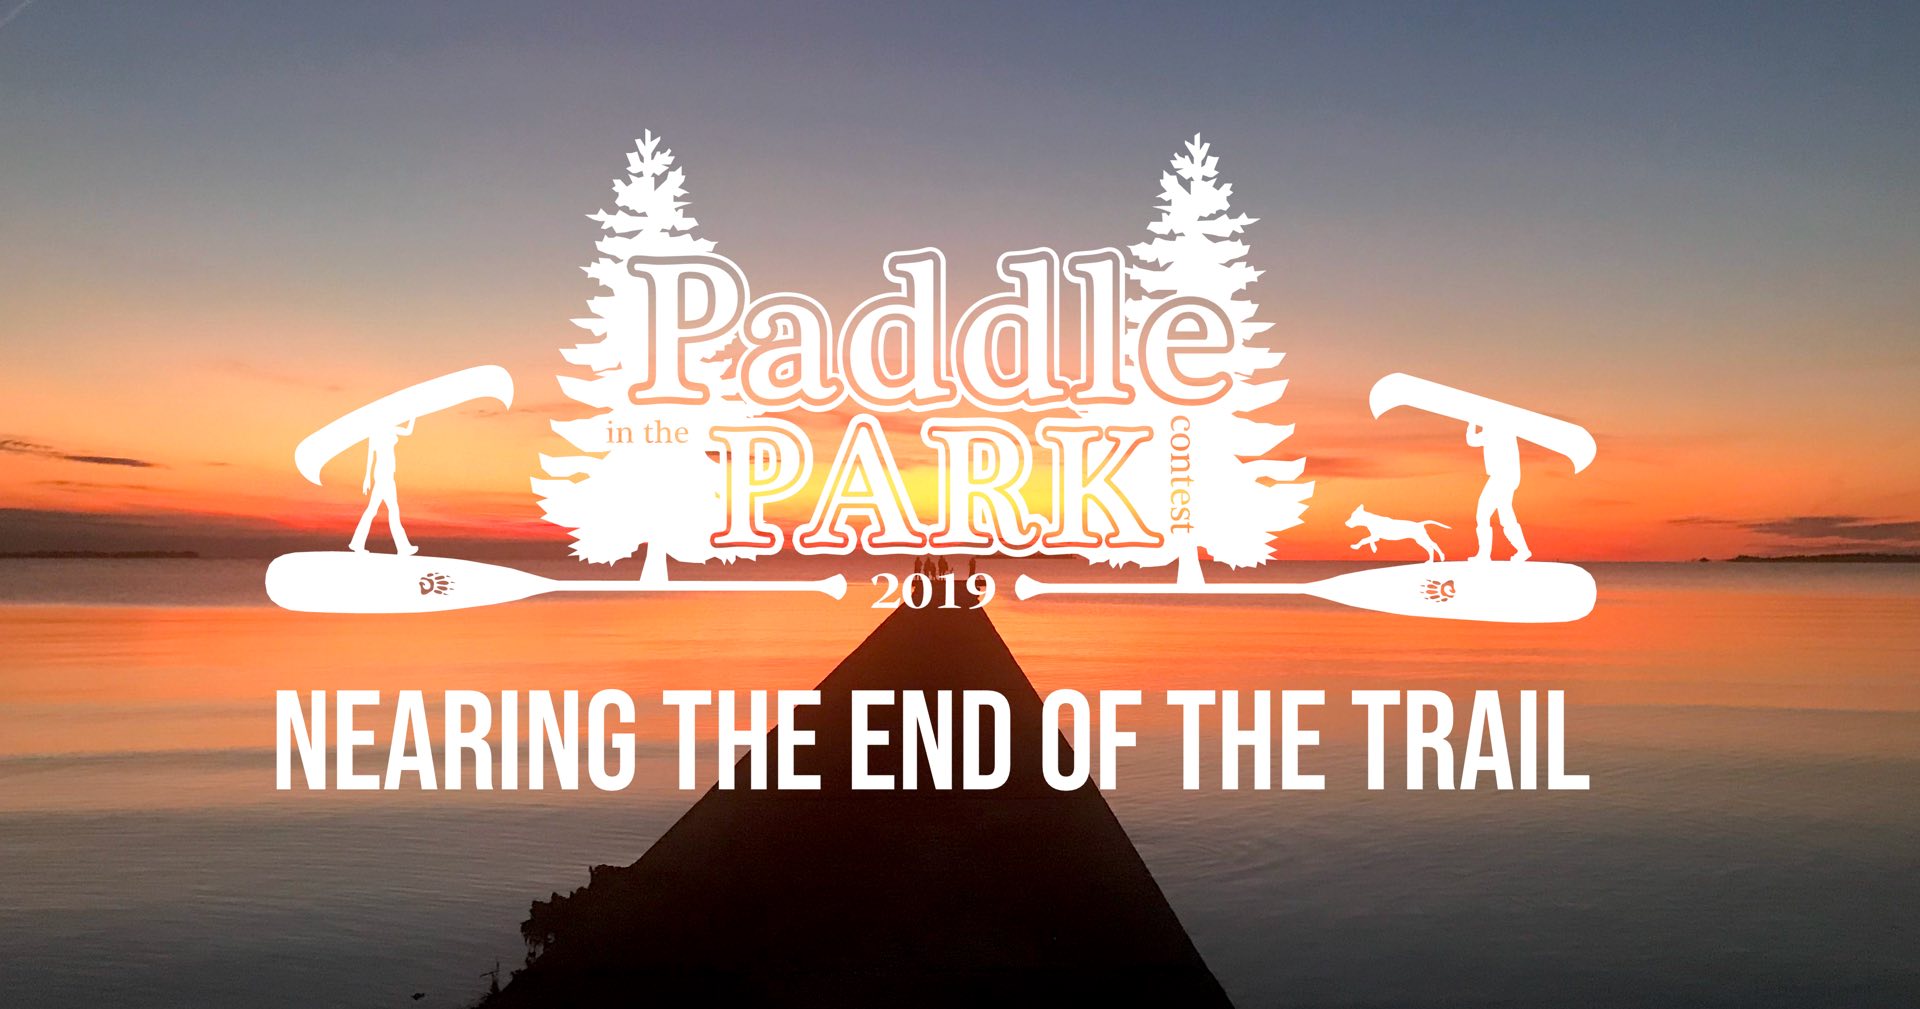 Nearing the End of the Trail text with Paddle in the Park Contest logo overlay on a long dock leading to water with a sunset background